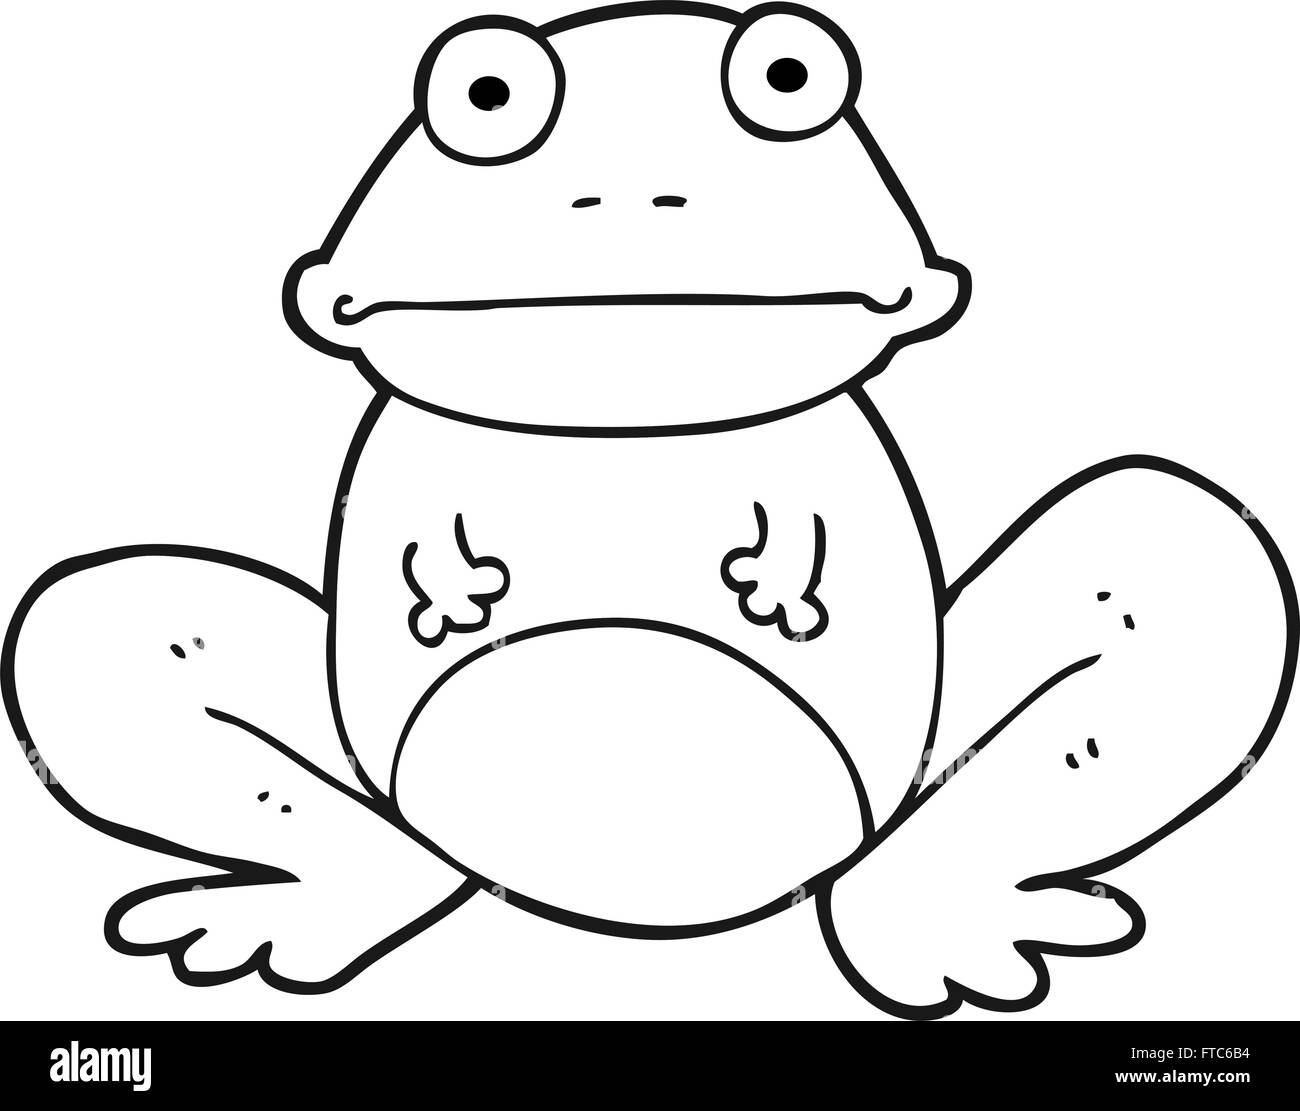 freehand drawn black and white cartoon frog Stock Vector